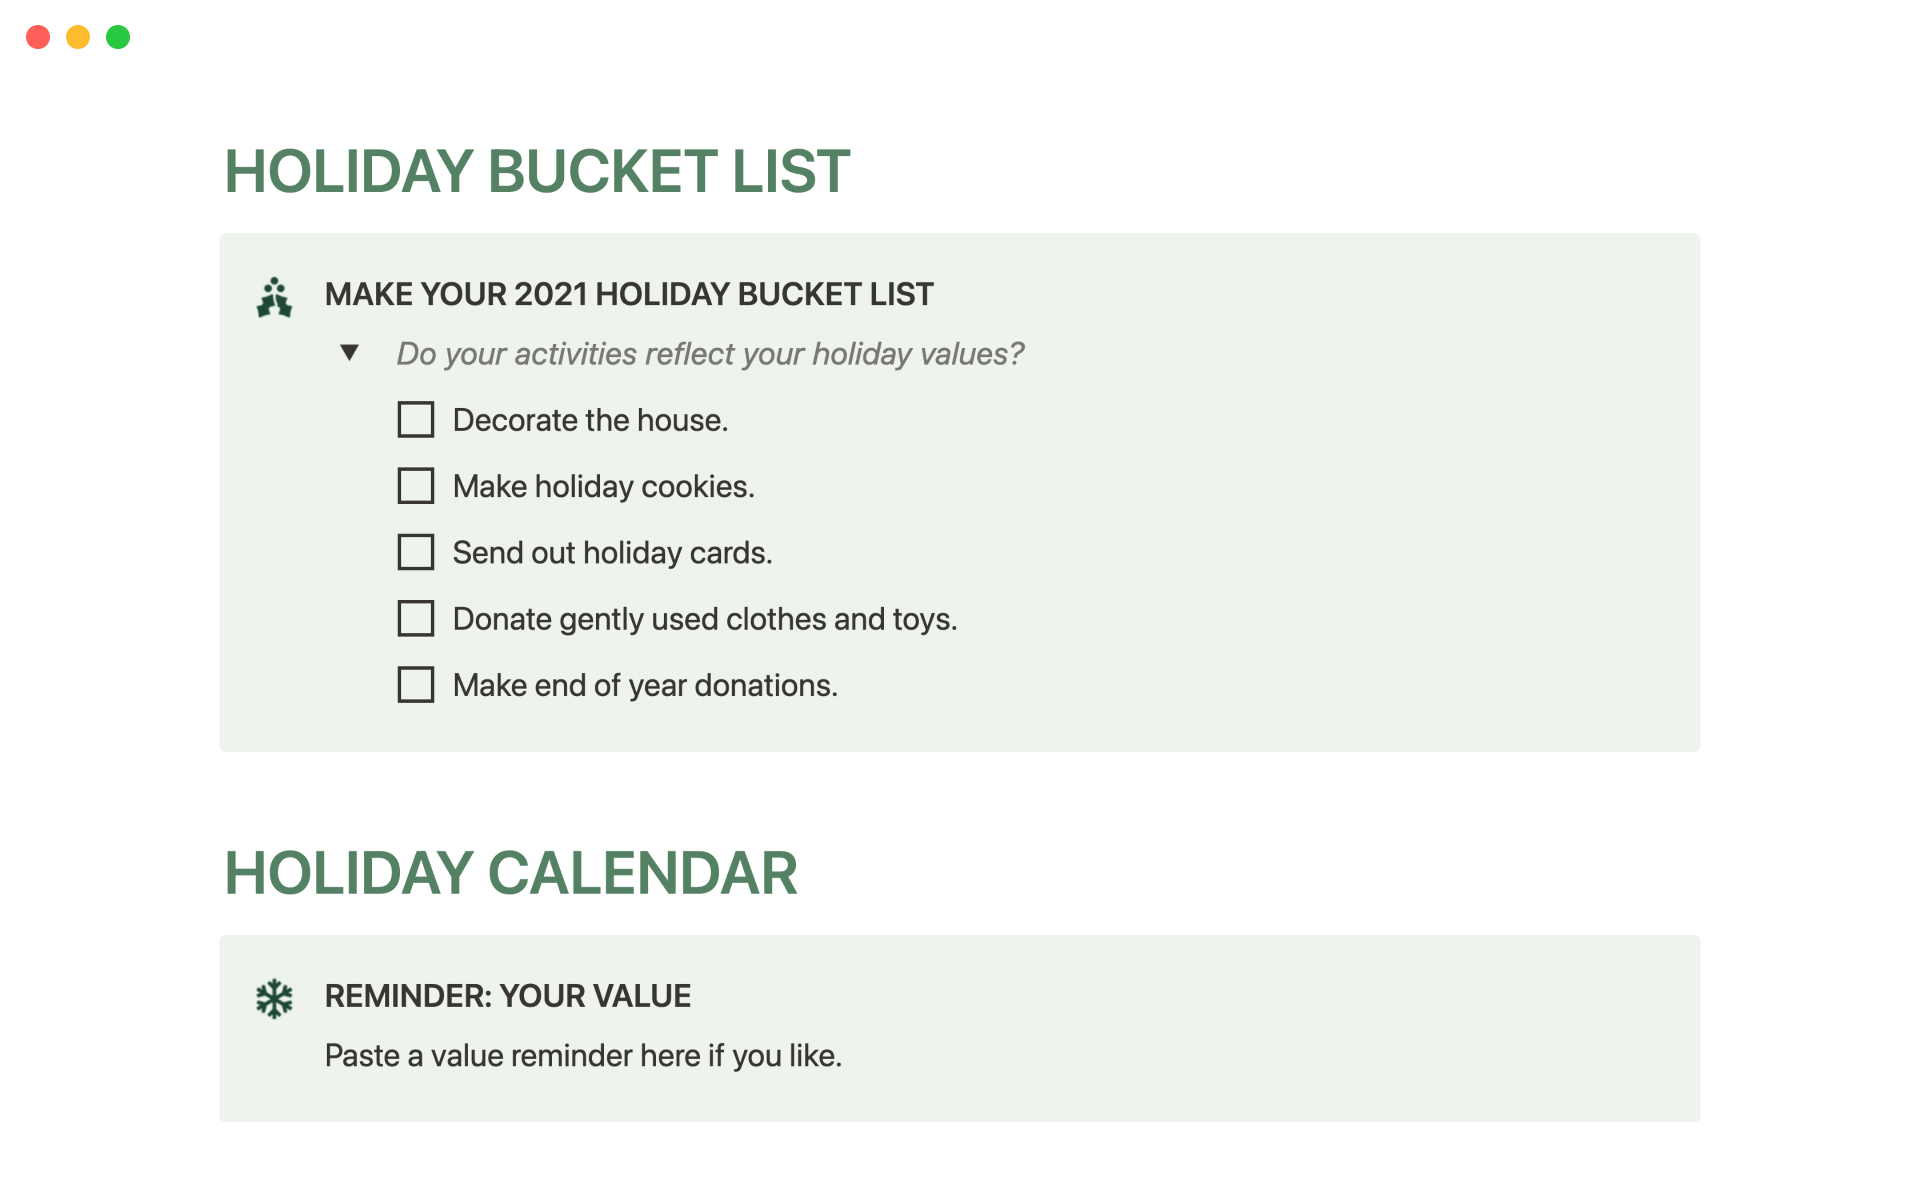 Track tasks, charitable donations, gifts, and the people you're buying gifts for this holiday season.